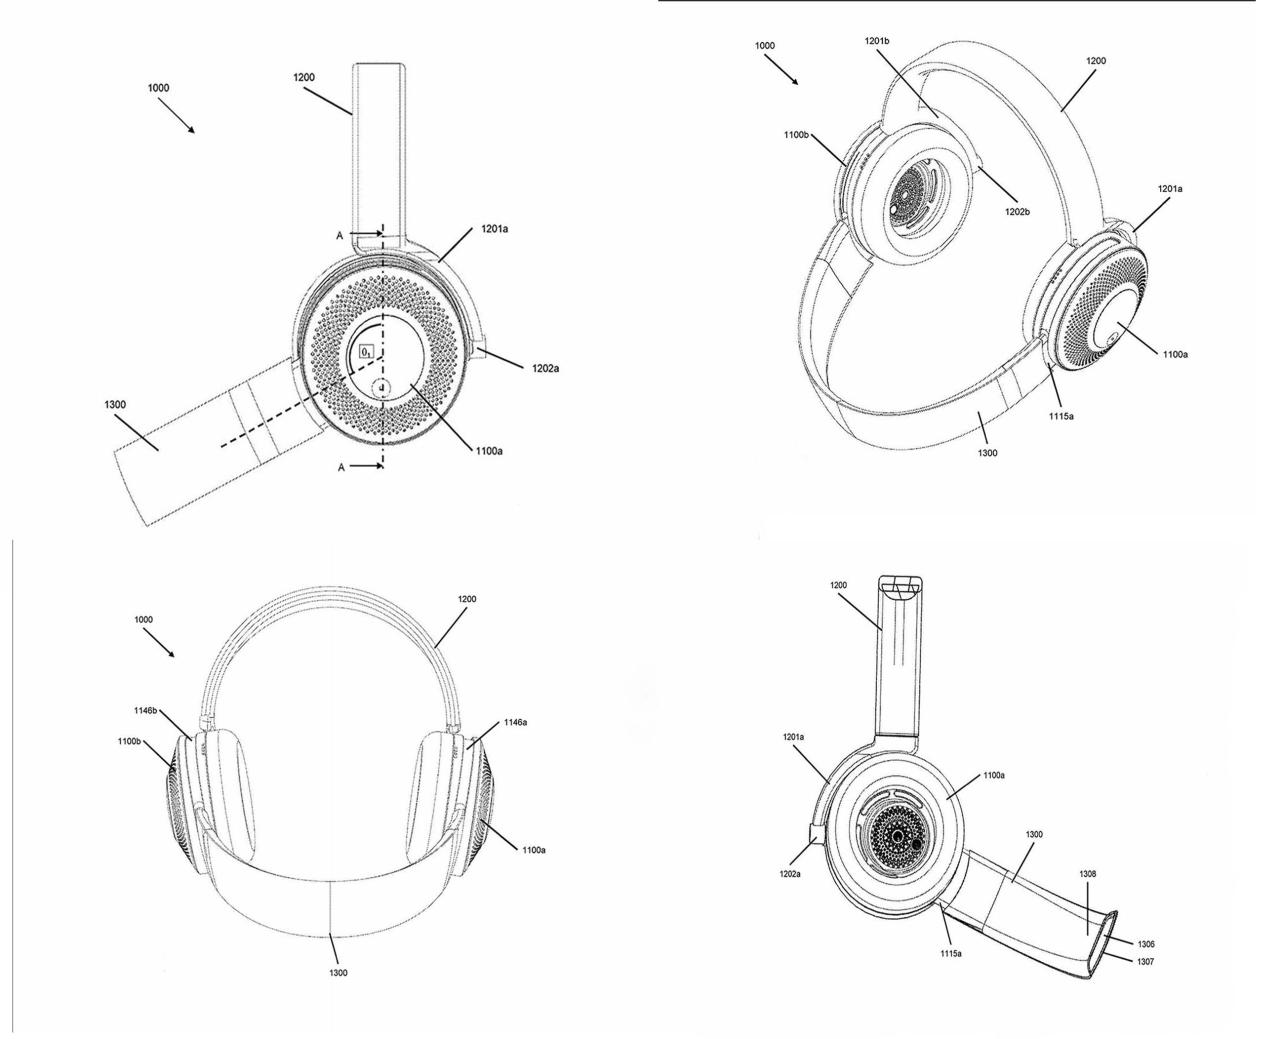 Dyson's patent for headphones with built-in air-purifiers is an answer for a question that